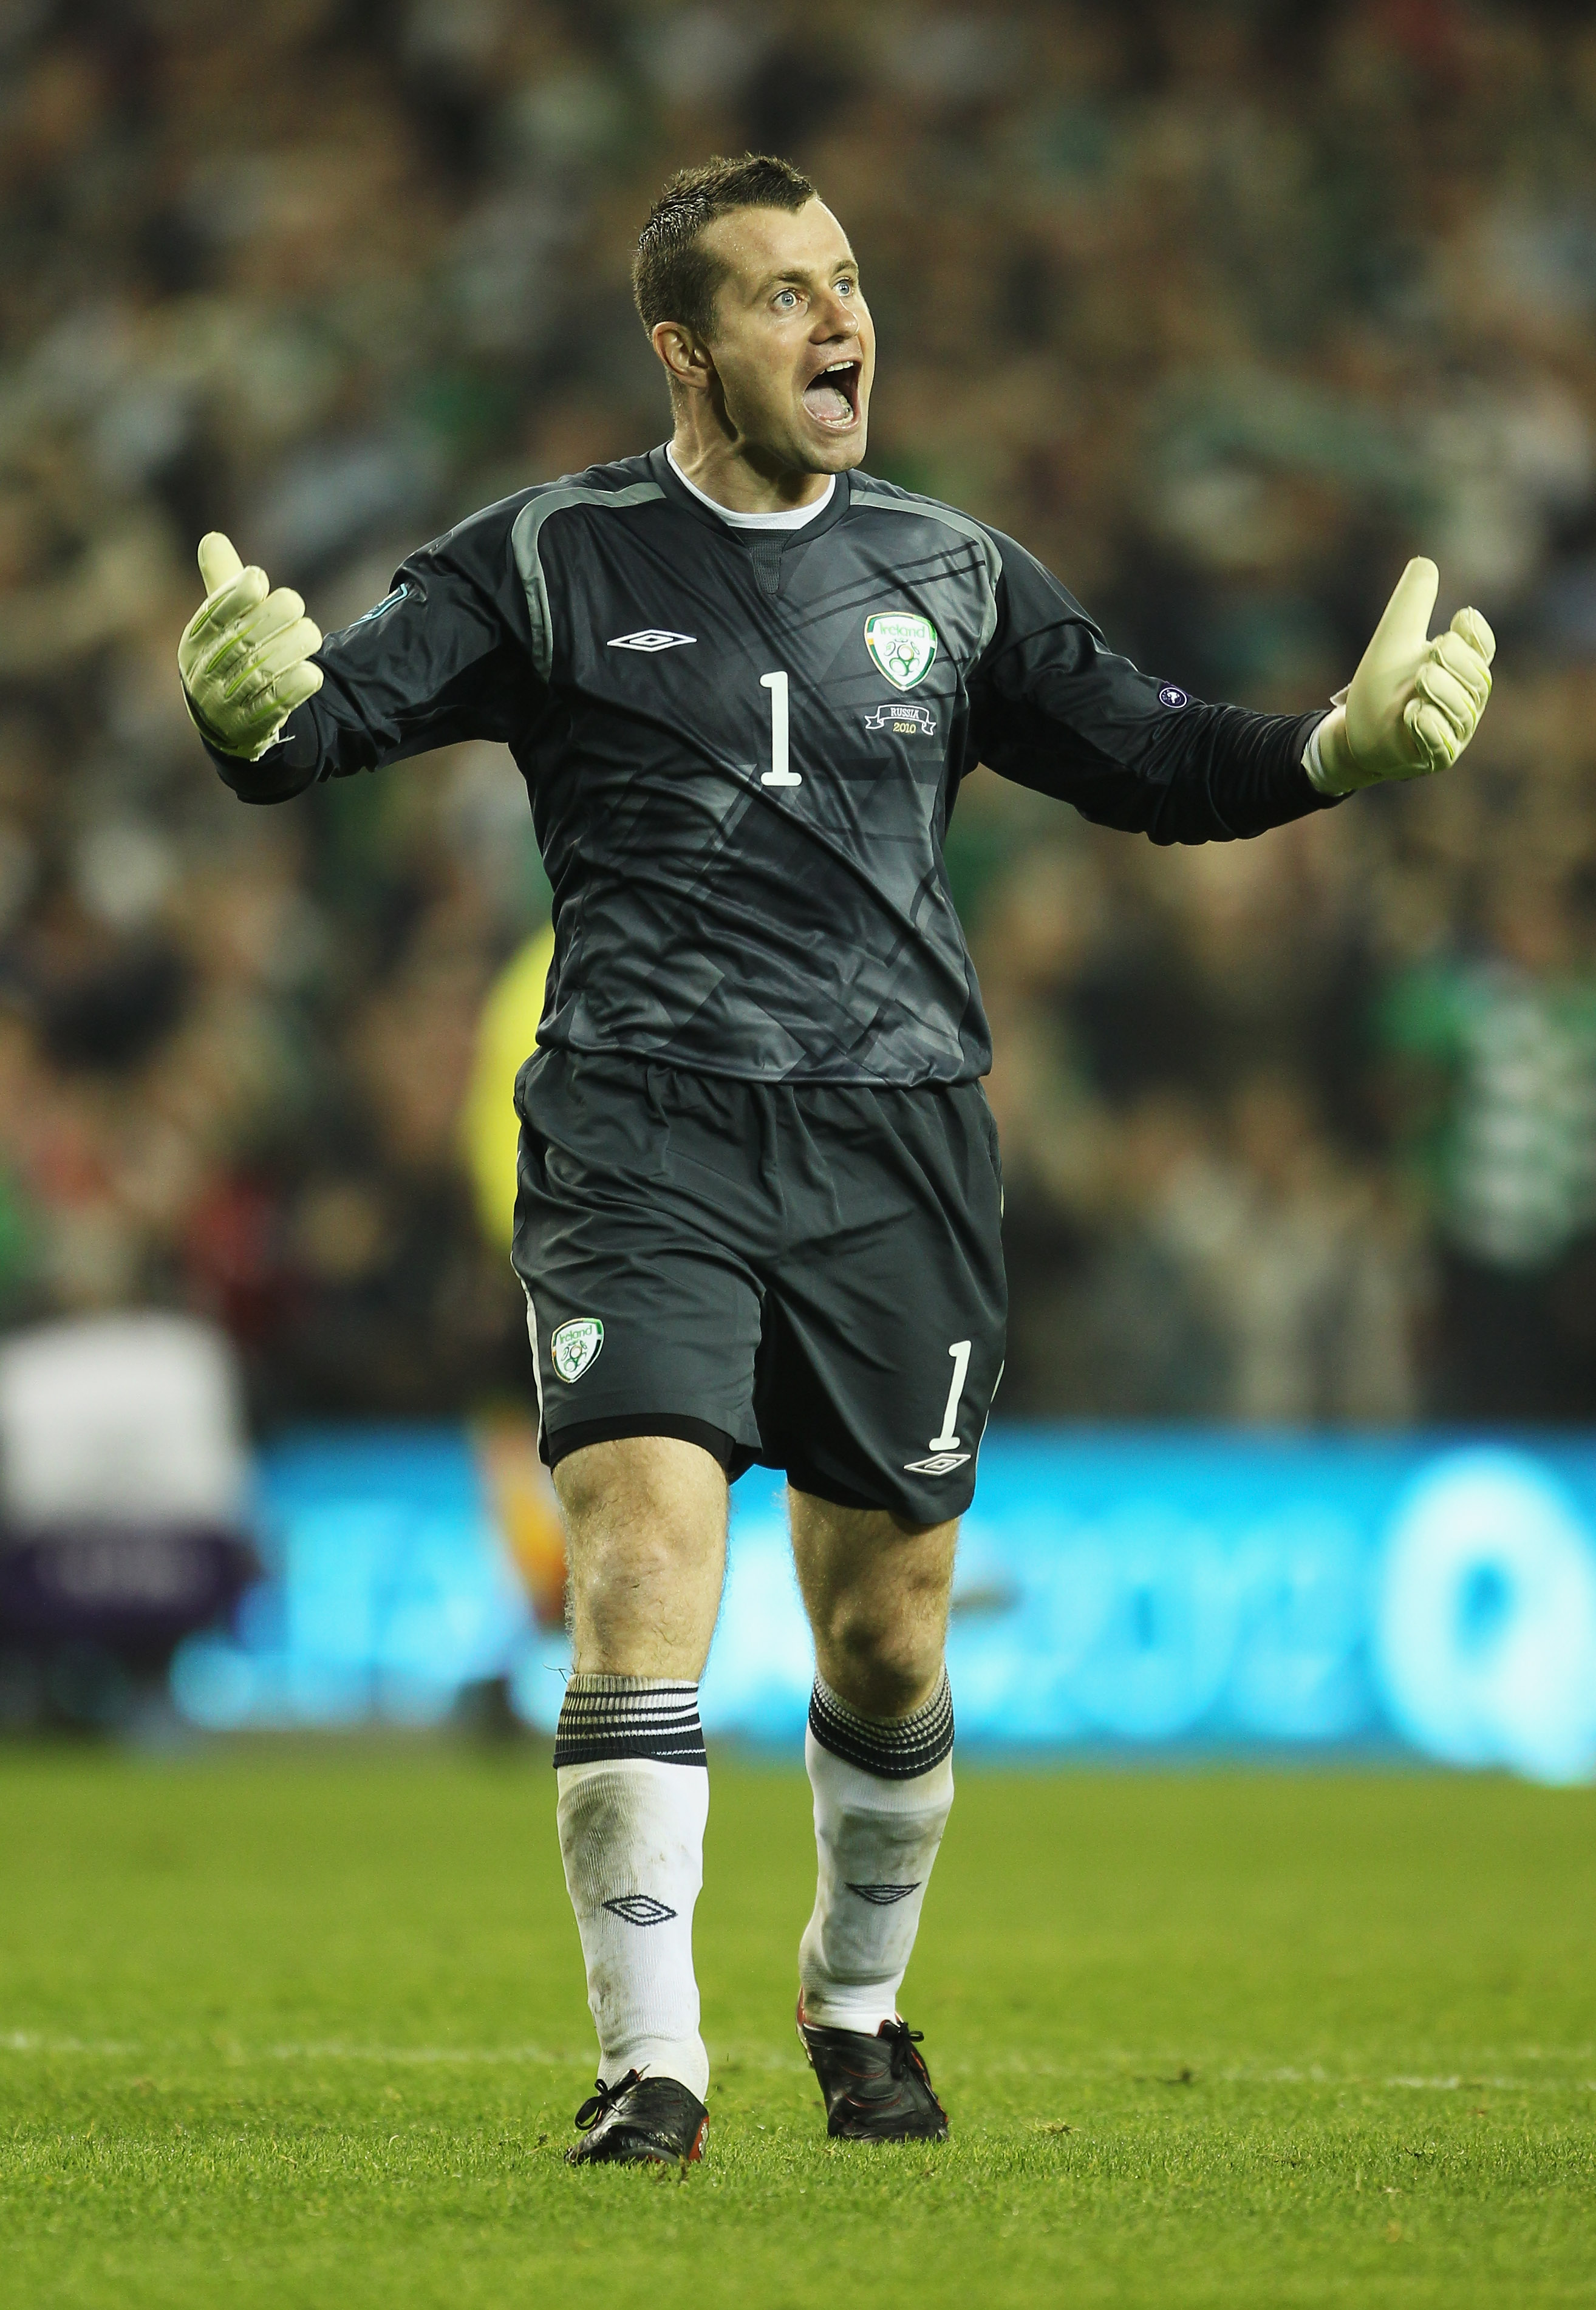 DUBLIN, IRELAND - OCTOBER 08:  Republic of Ireland goalkeeper Shay Given reacts during the EURO 2012 Qualifier Group B match between the Republic of Ireland and Russia at Lansdowne Road on October 8, 2010 in Dublin, Ireland.  (Photo by Bryn Lennon/Getty I